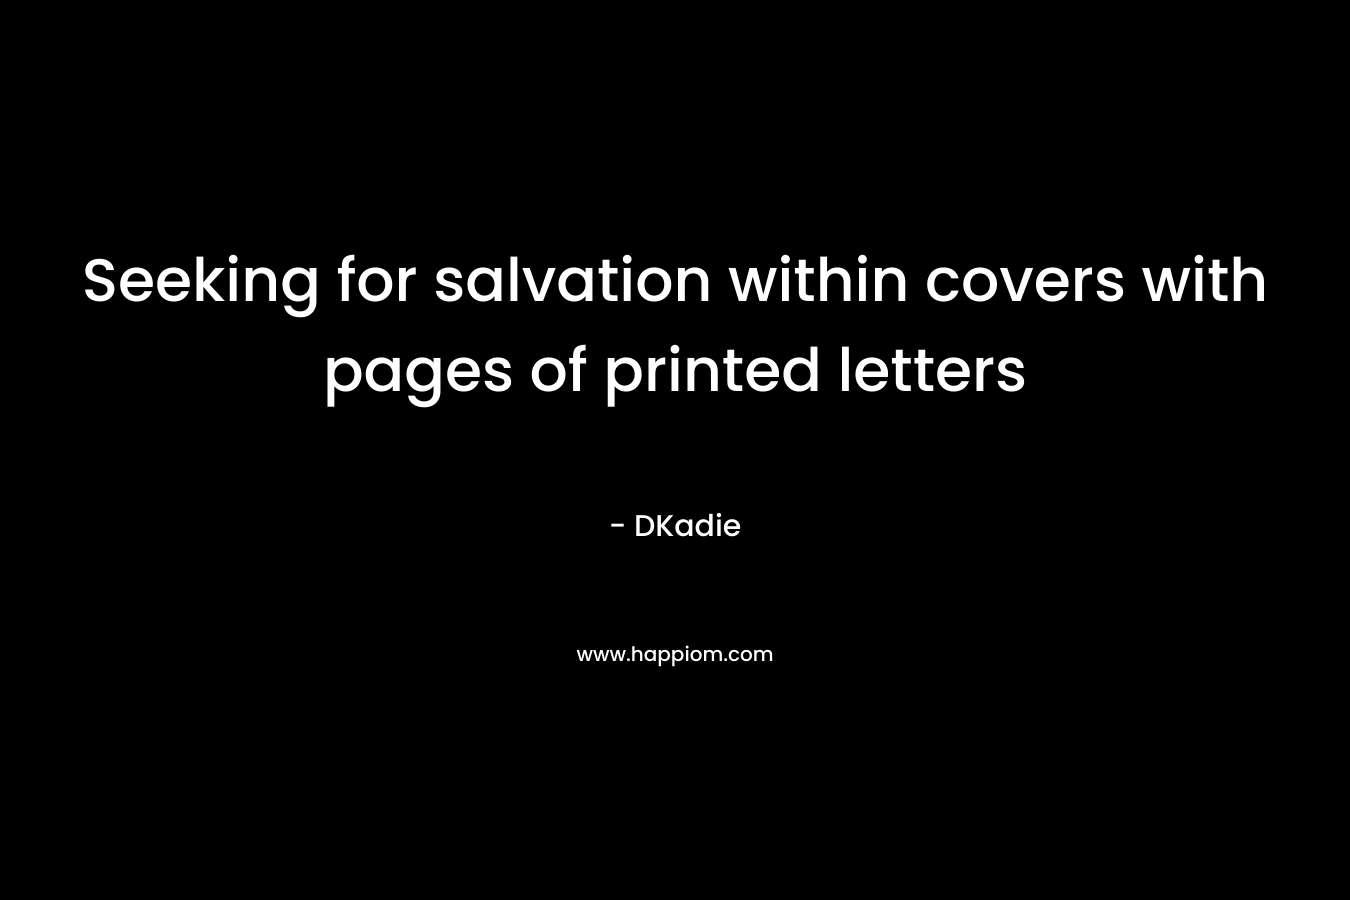 Seeking for salvation within covers with pages of printed letters